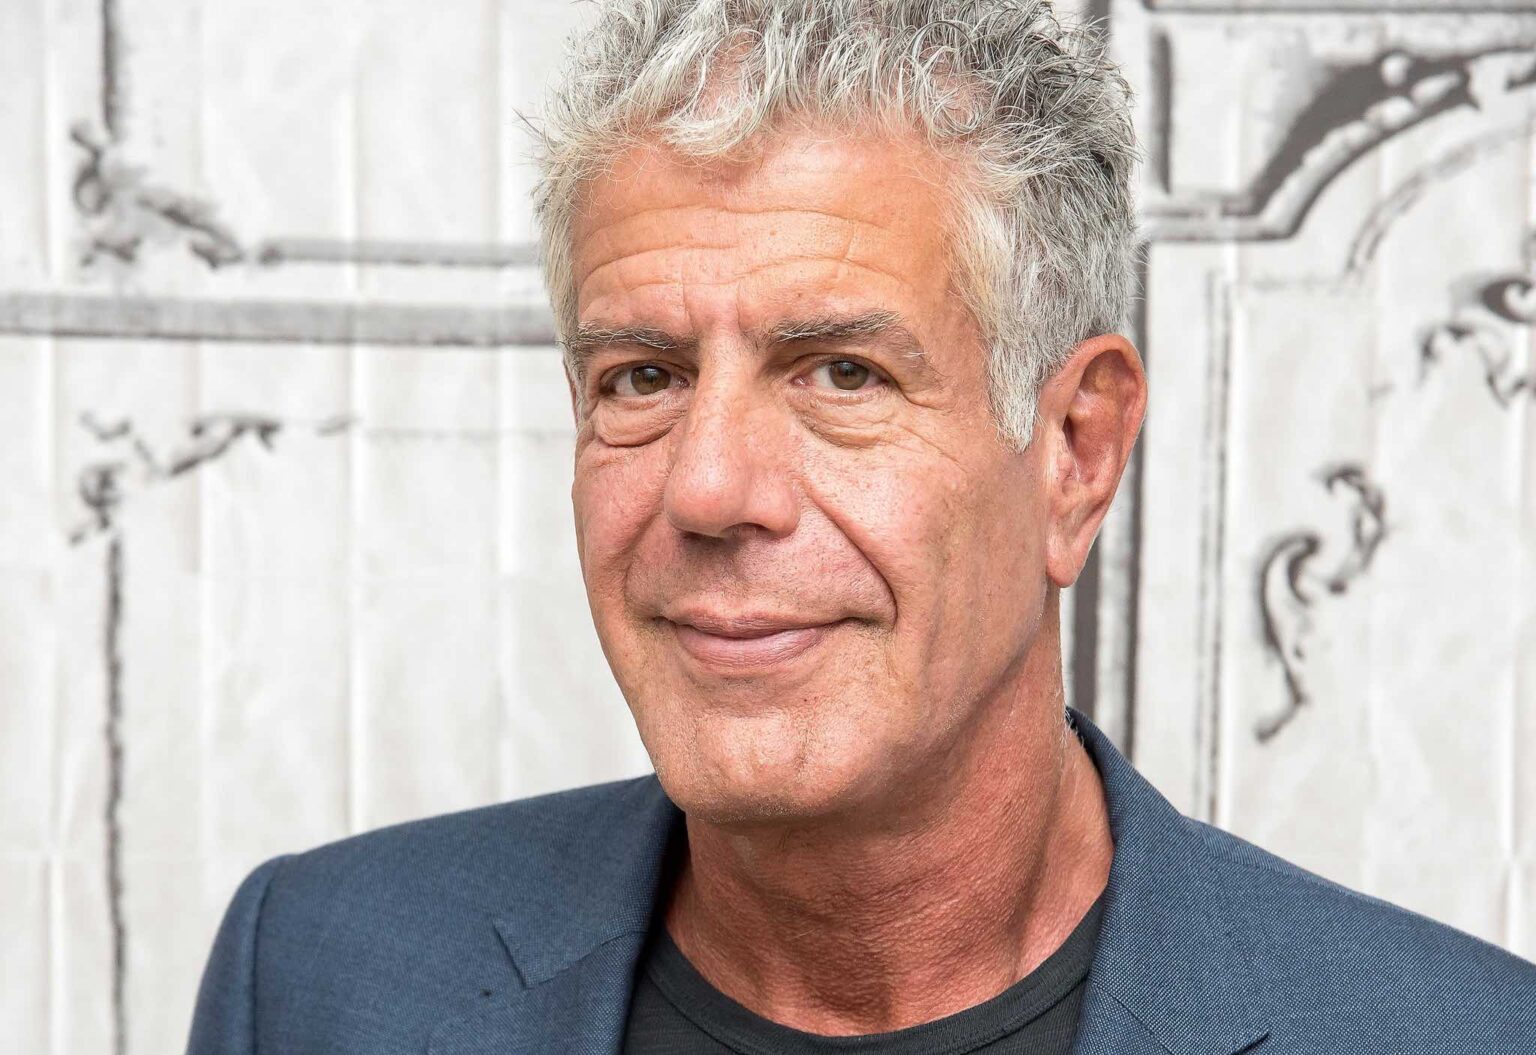 Foodies around the world couldn't be more excited about Anthony Bourdain in 'Roadrunner'. Unwrap the details and see if his cause of death will be examined.